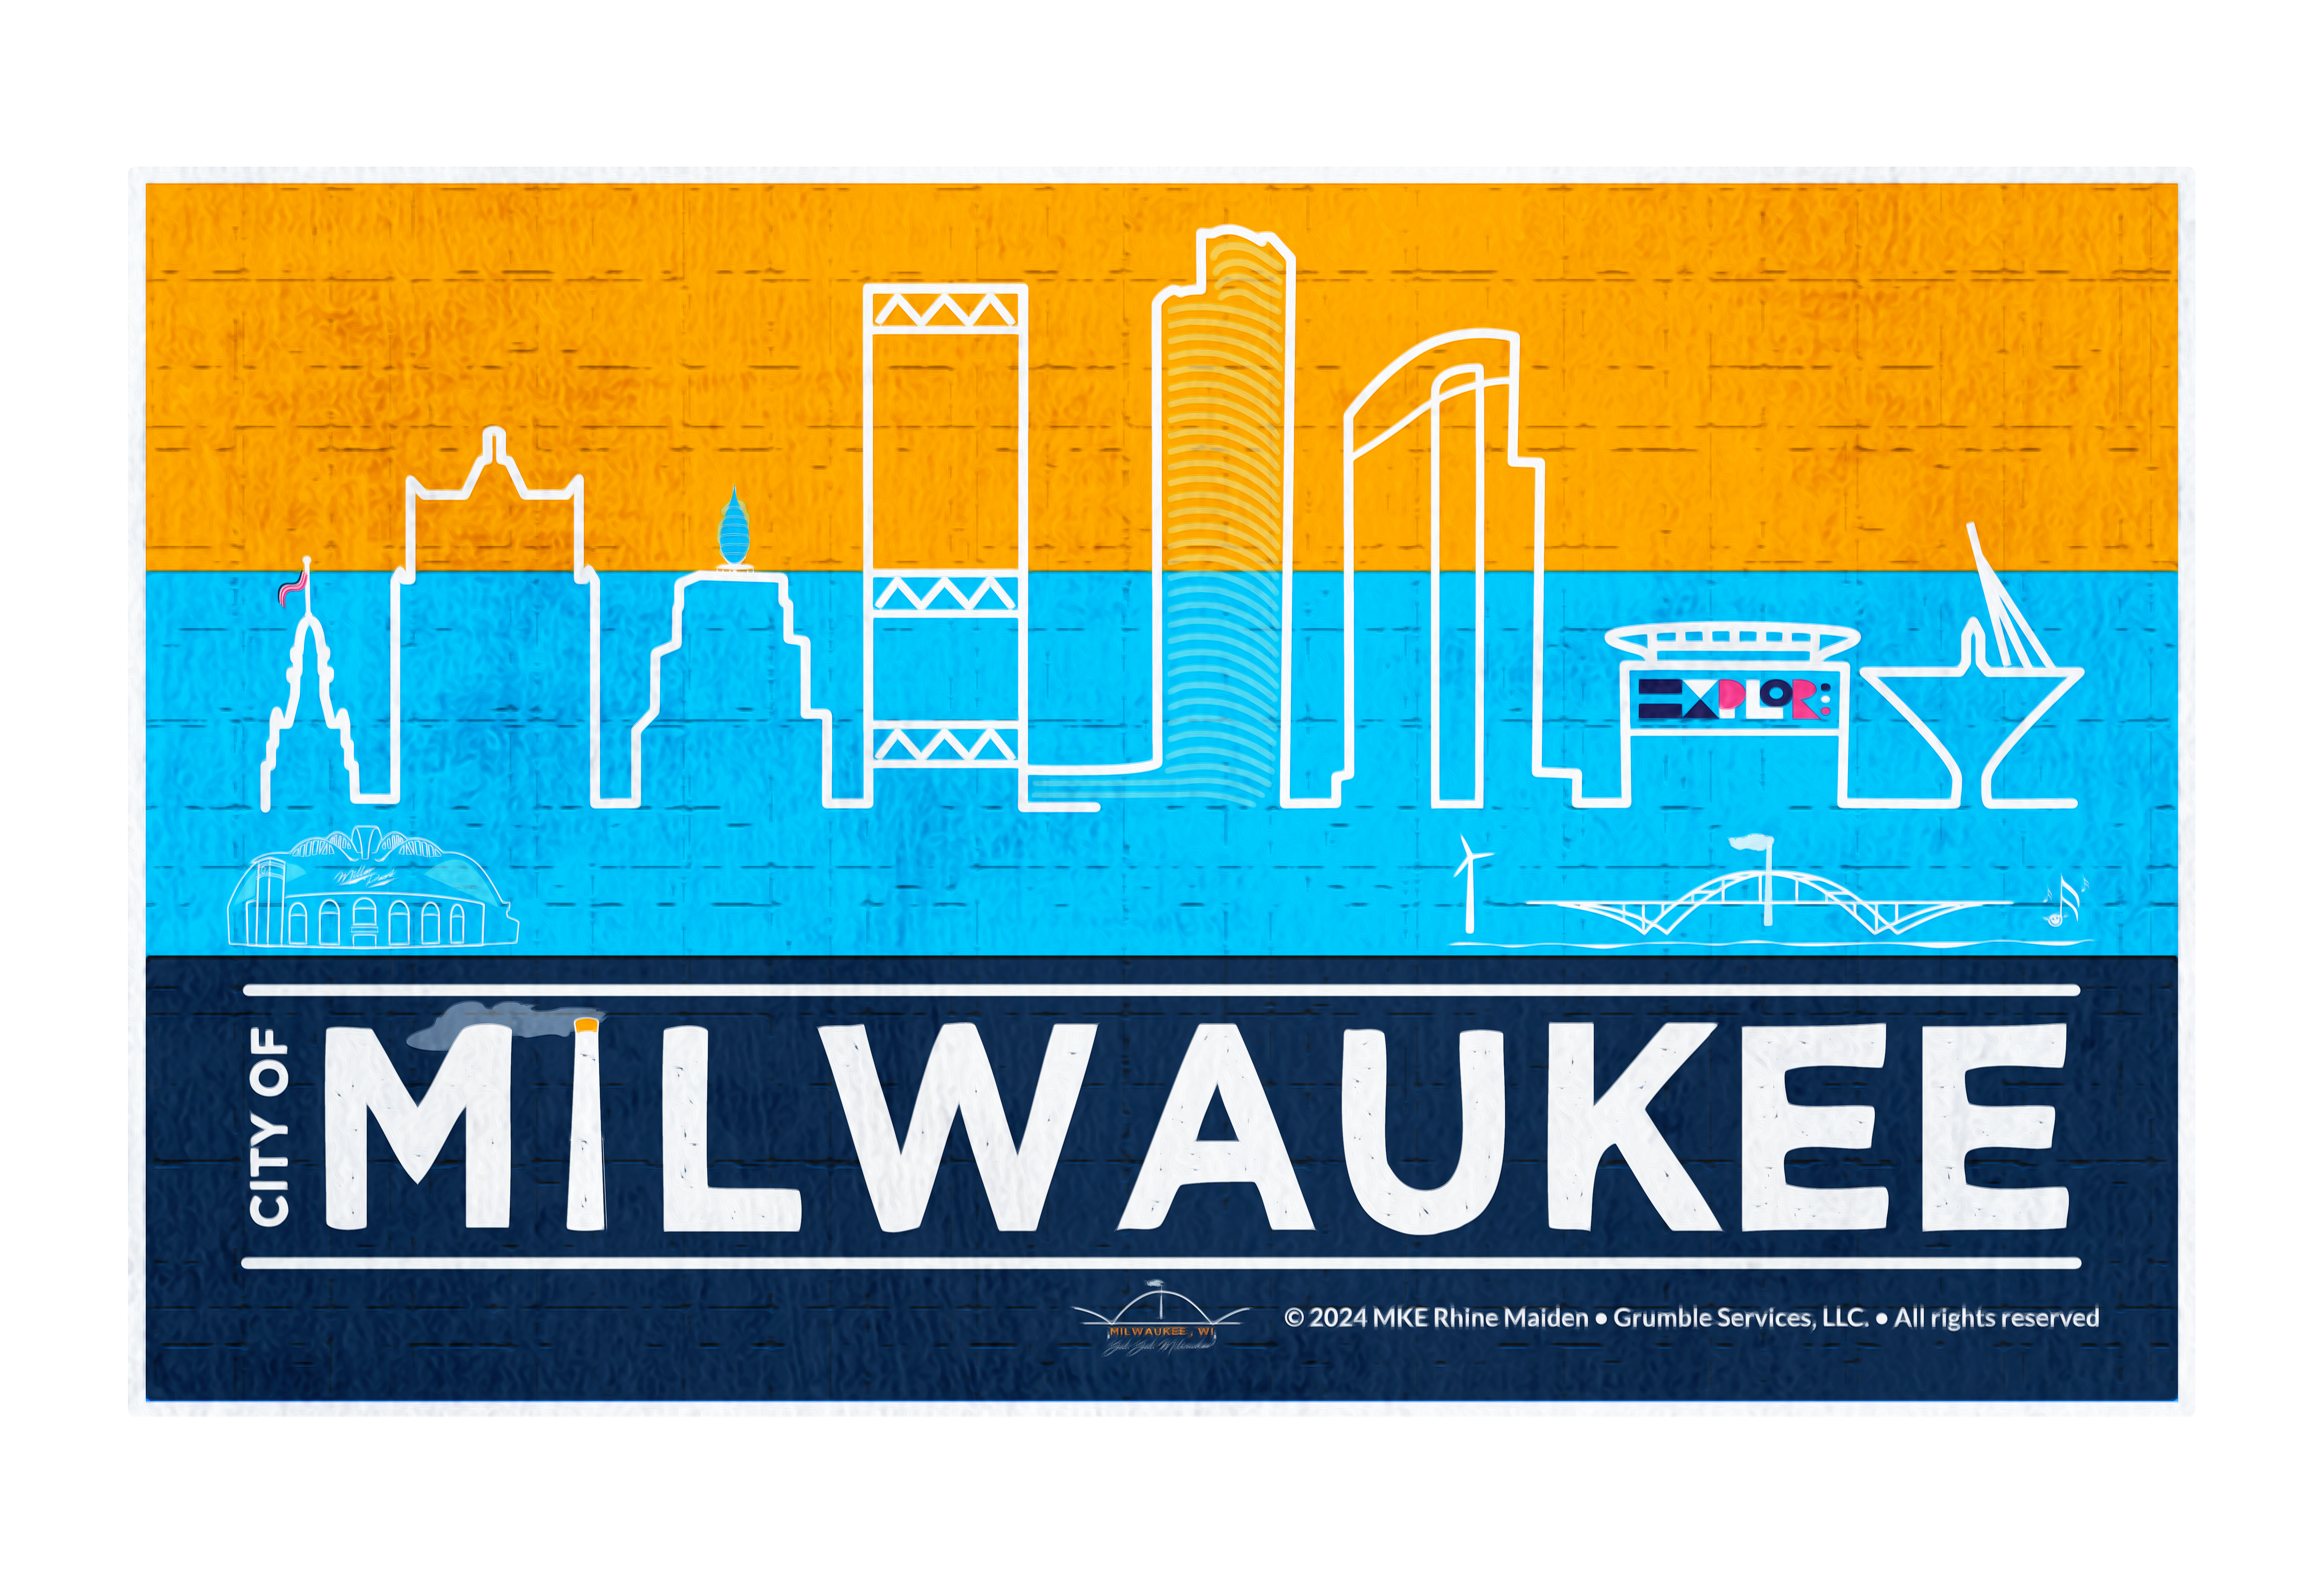 MKE Flag, City-Skyline. © 2024 Grumble Services, LLC. • All rights reserved https://www.teepublic.com/t-shirt/47537070-mke-flag-city-skyline-flag-milwaukee-wi?store_id=2708175